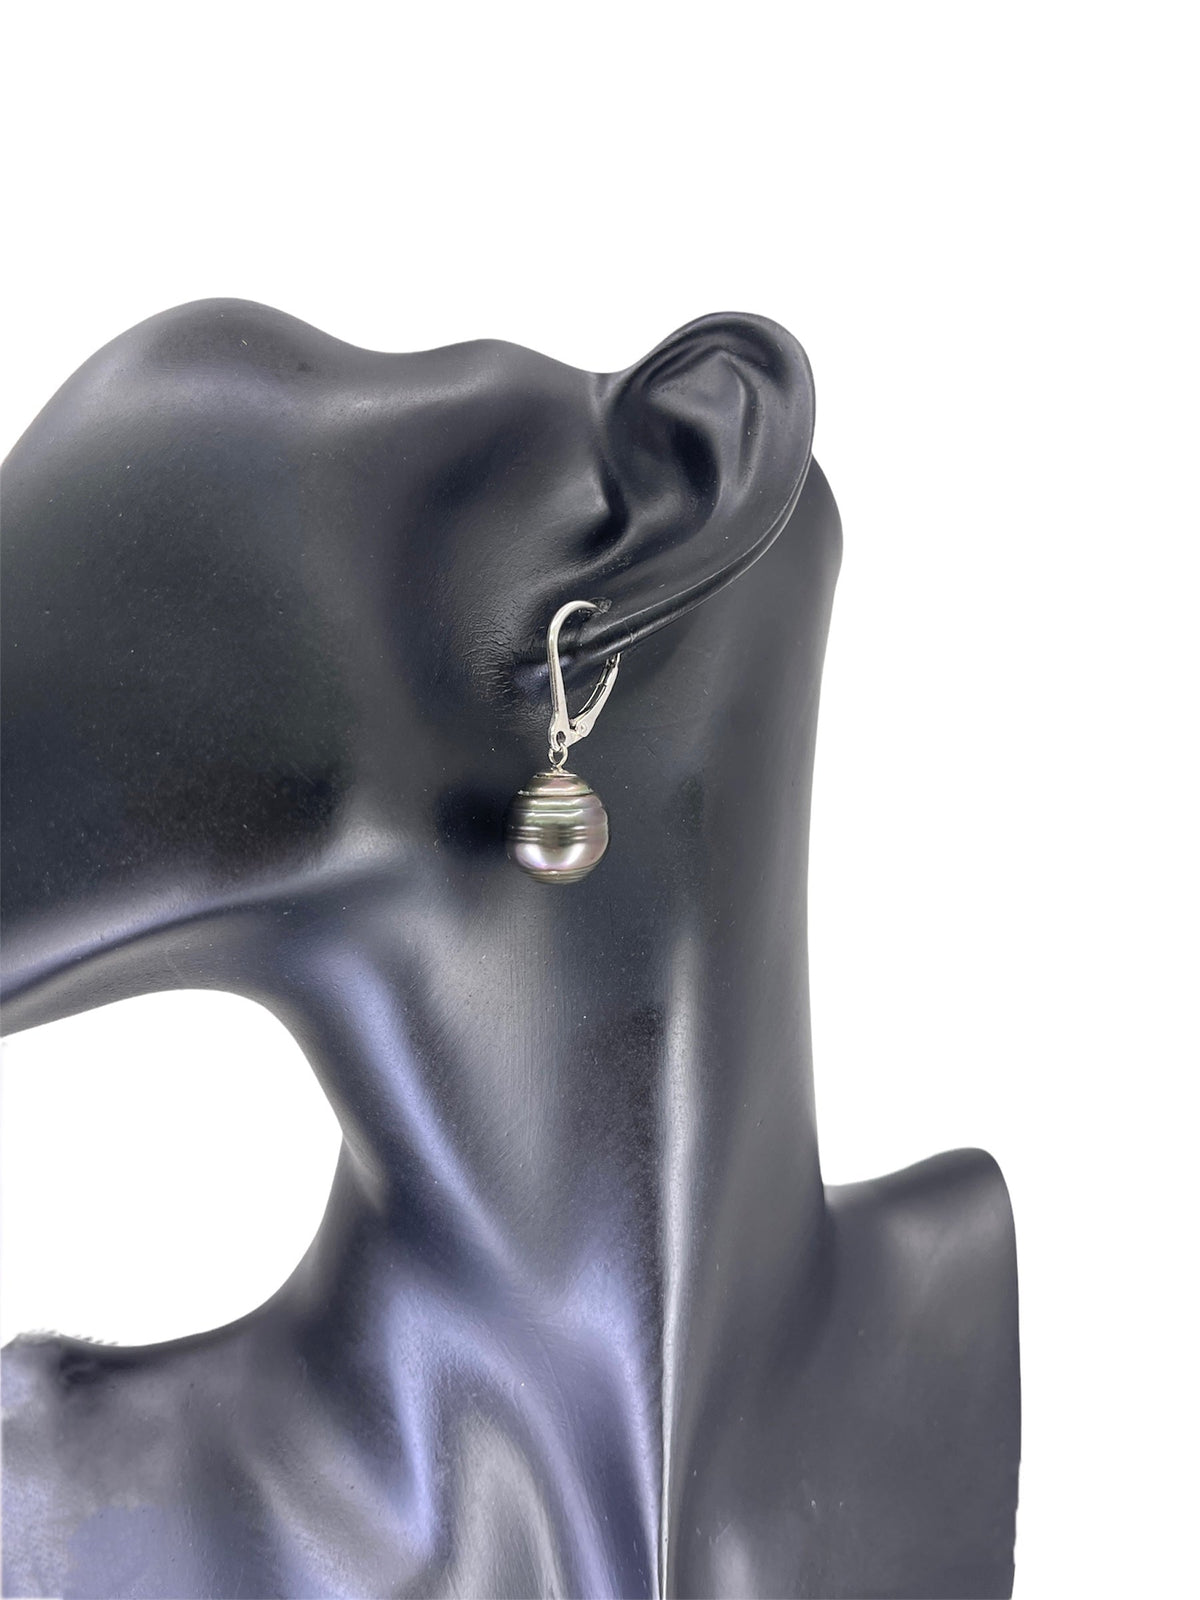 14K White Gold 12mm Tahitian Pearl Dangle Earrings with Lever Back Closure